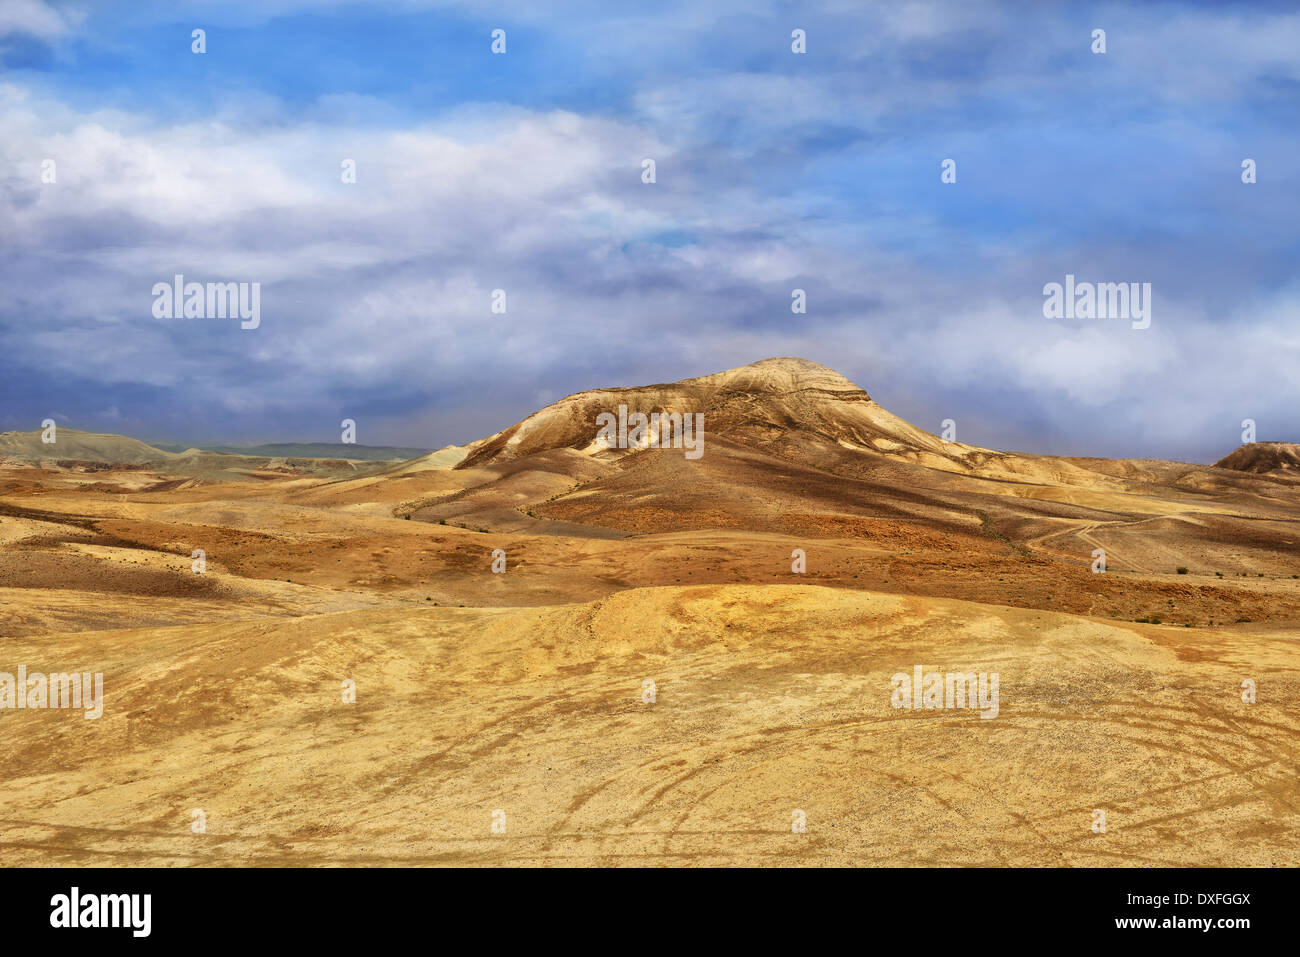 Landscape in the Judean desert. A beautiful combination of blue sky and bright yellow hills. Stock Photo